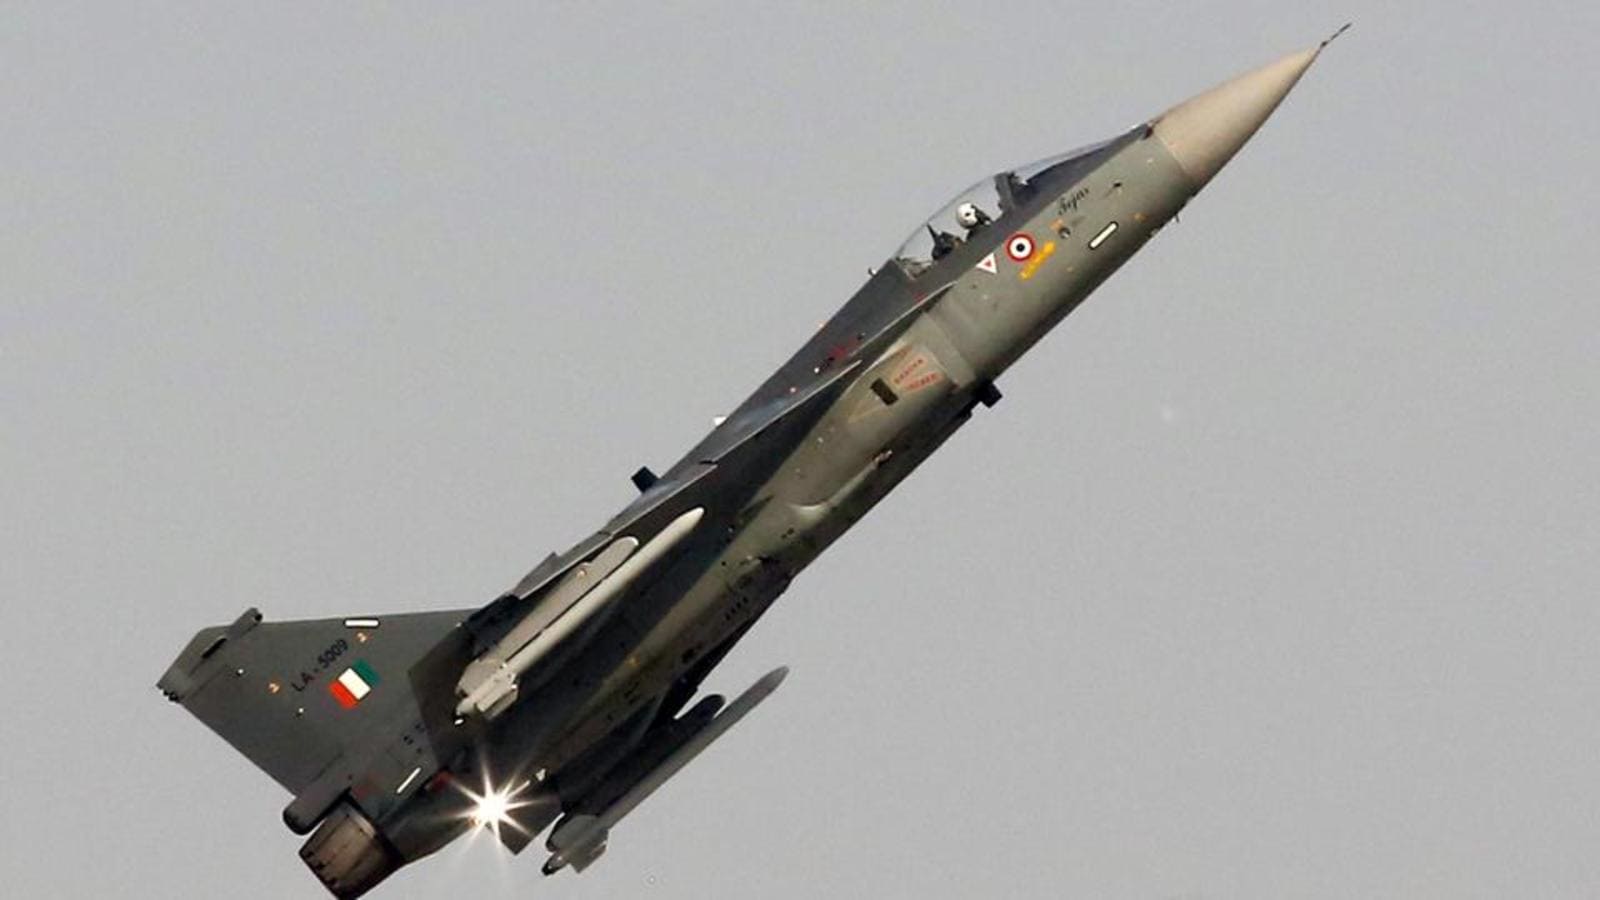 Open and ready to provide India more Rafales, says French defence minister Parly